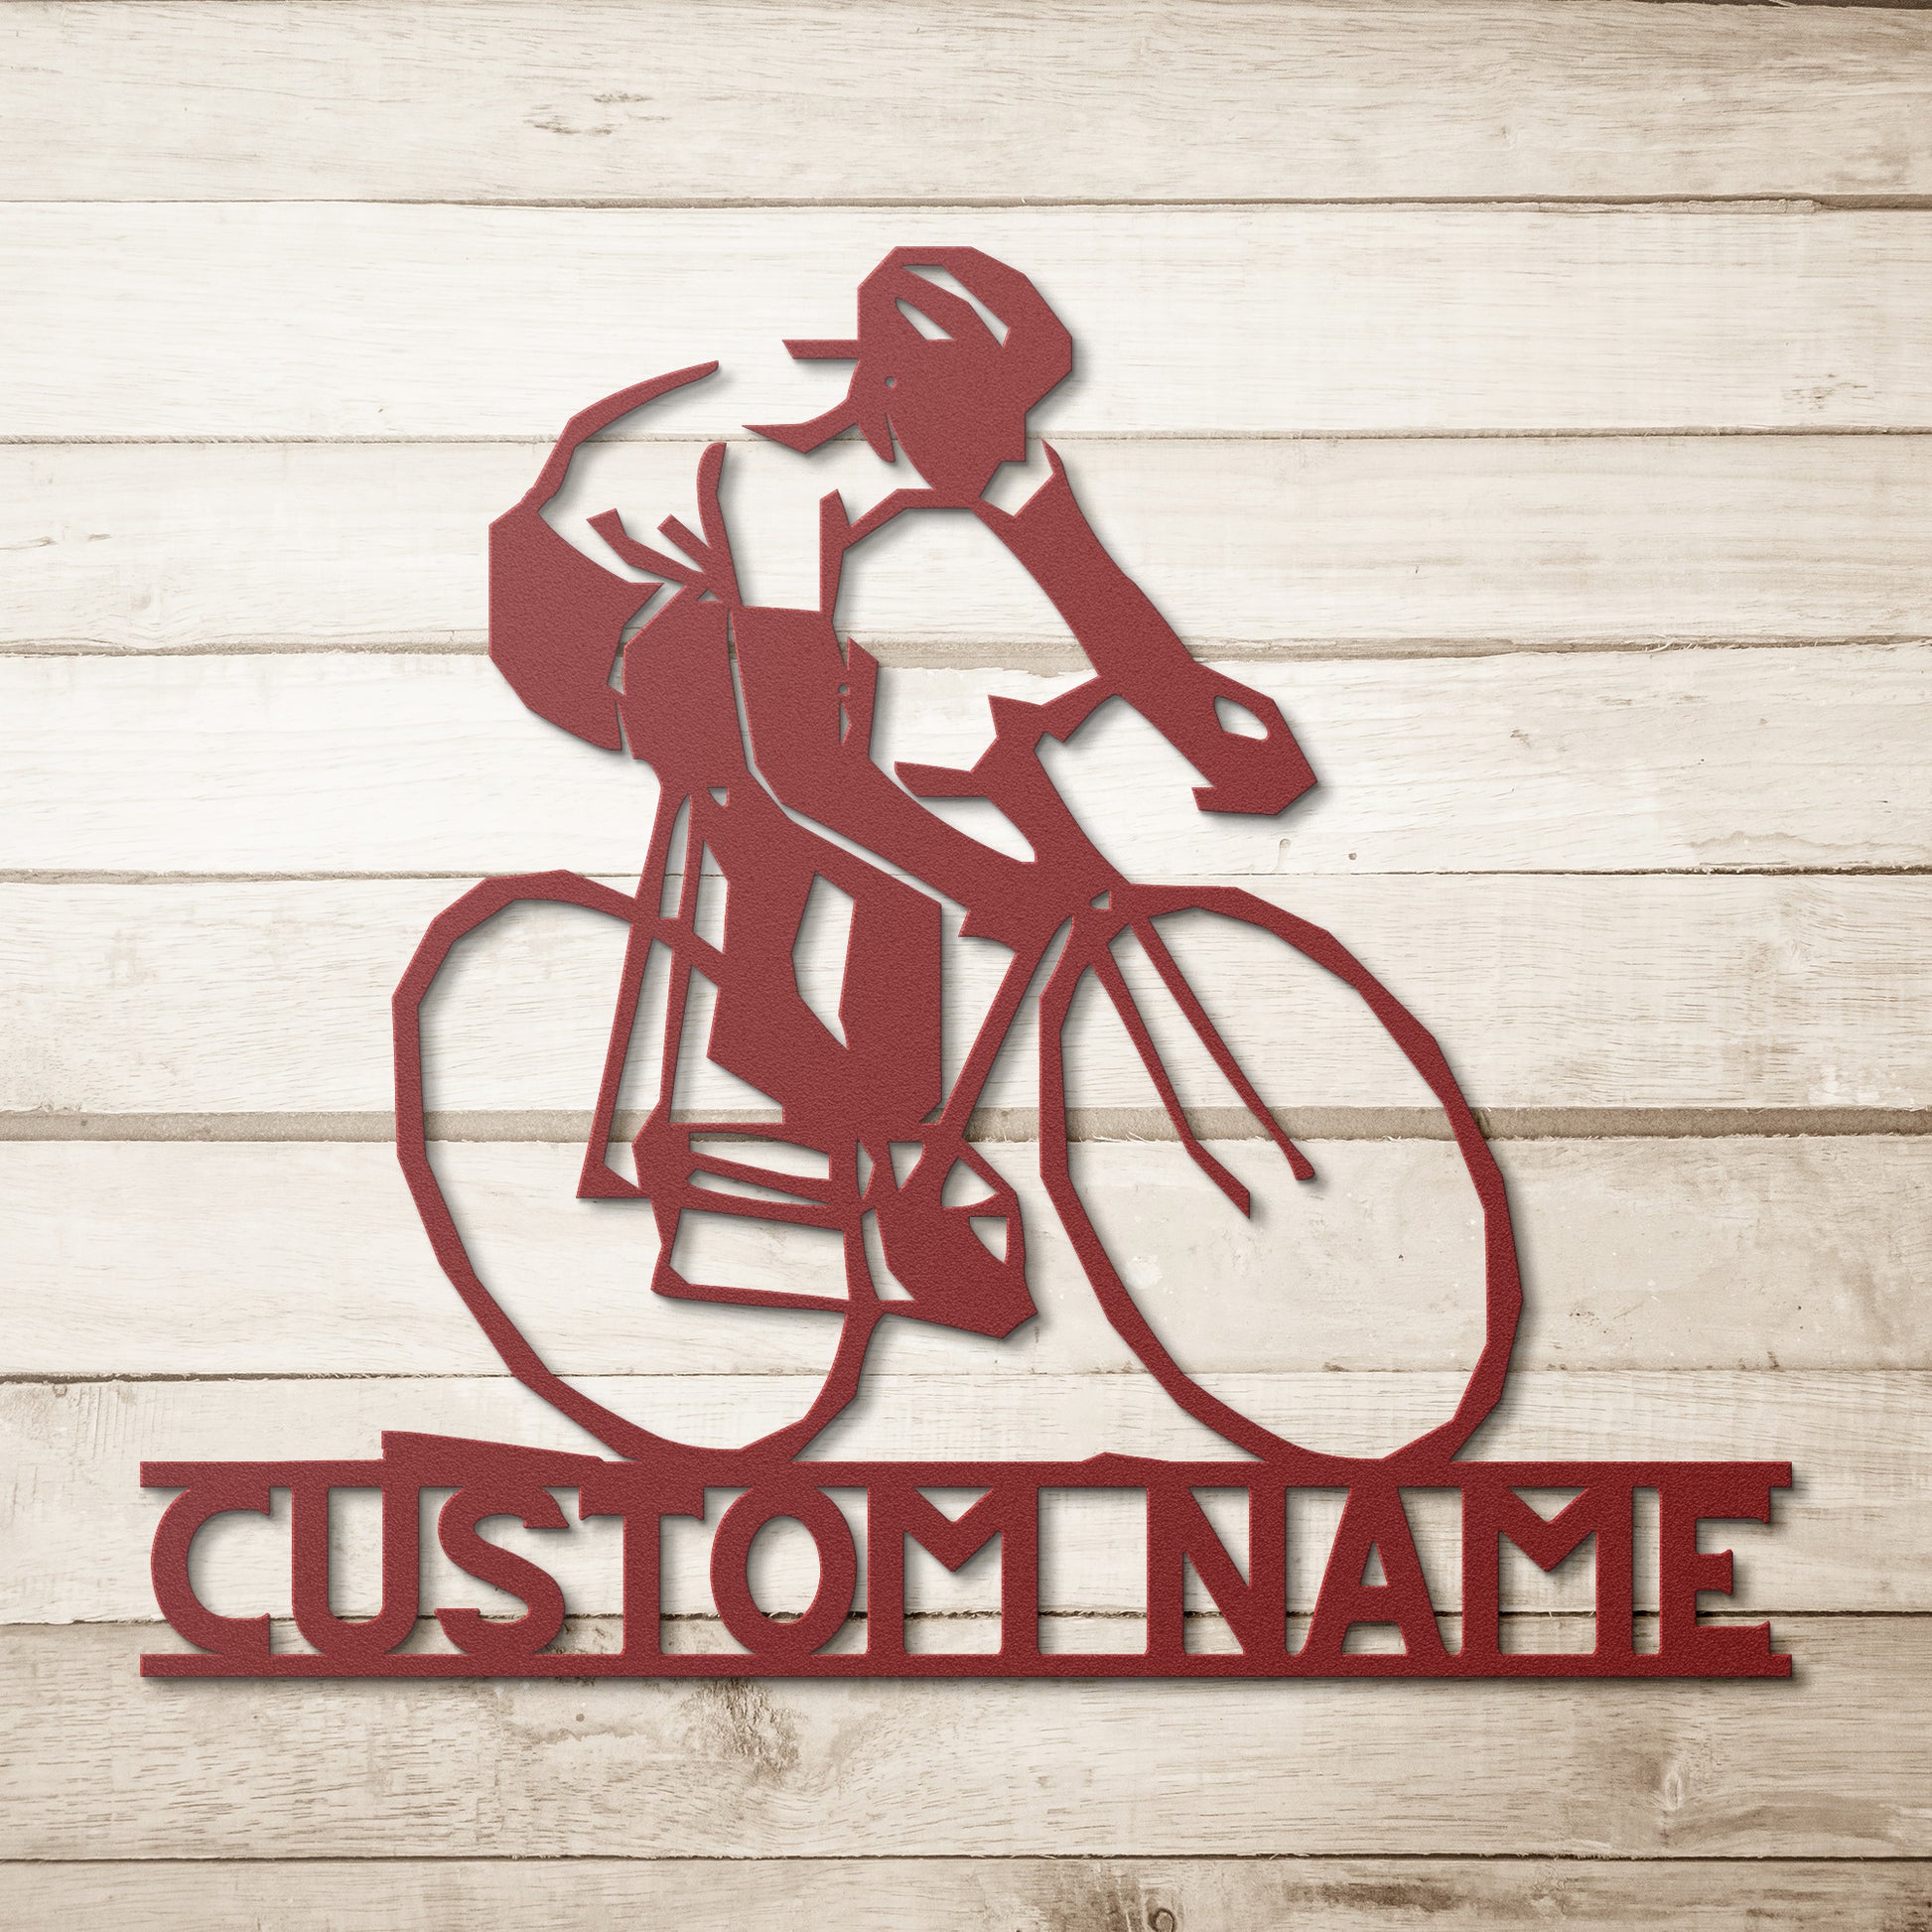 A teelaunch Personalized Gift For Cyclist - Cycling Metal Wall Art Sign featuring a bicycle rider silhouette on an 18 gauge steel background.